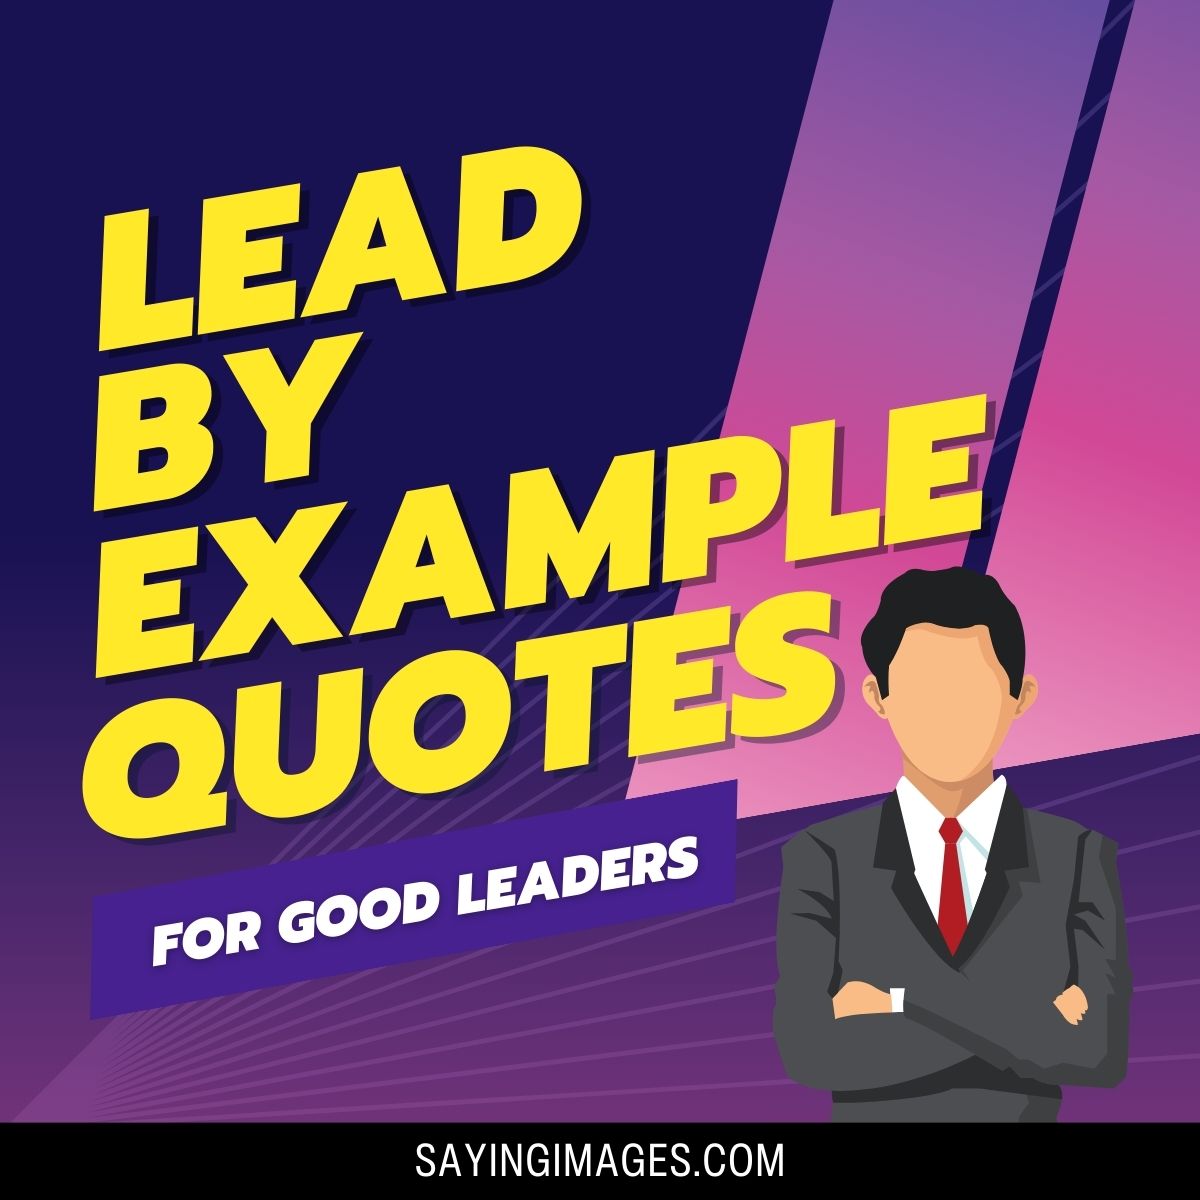 Lead By Example Quotes For Good Leaders